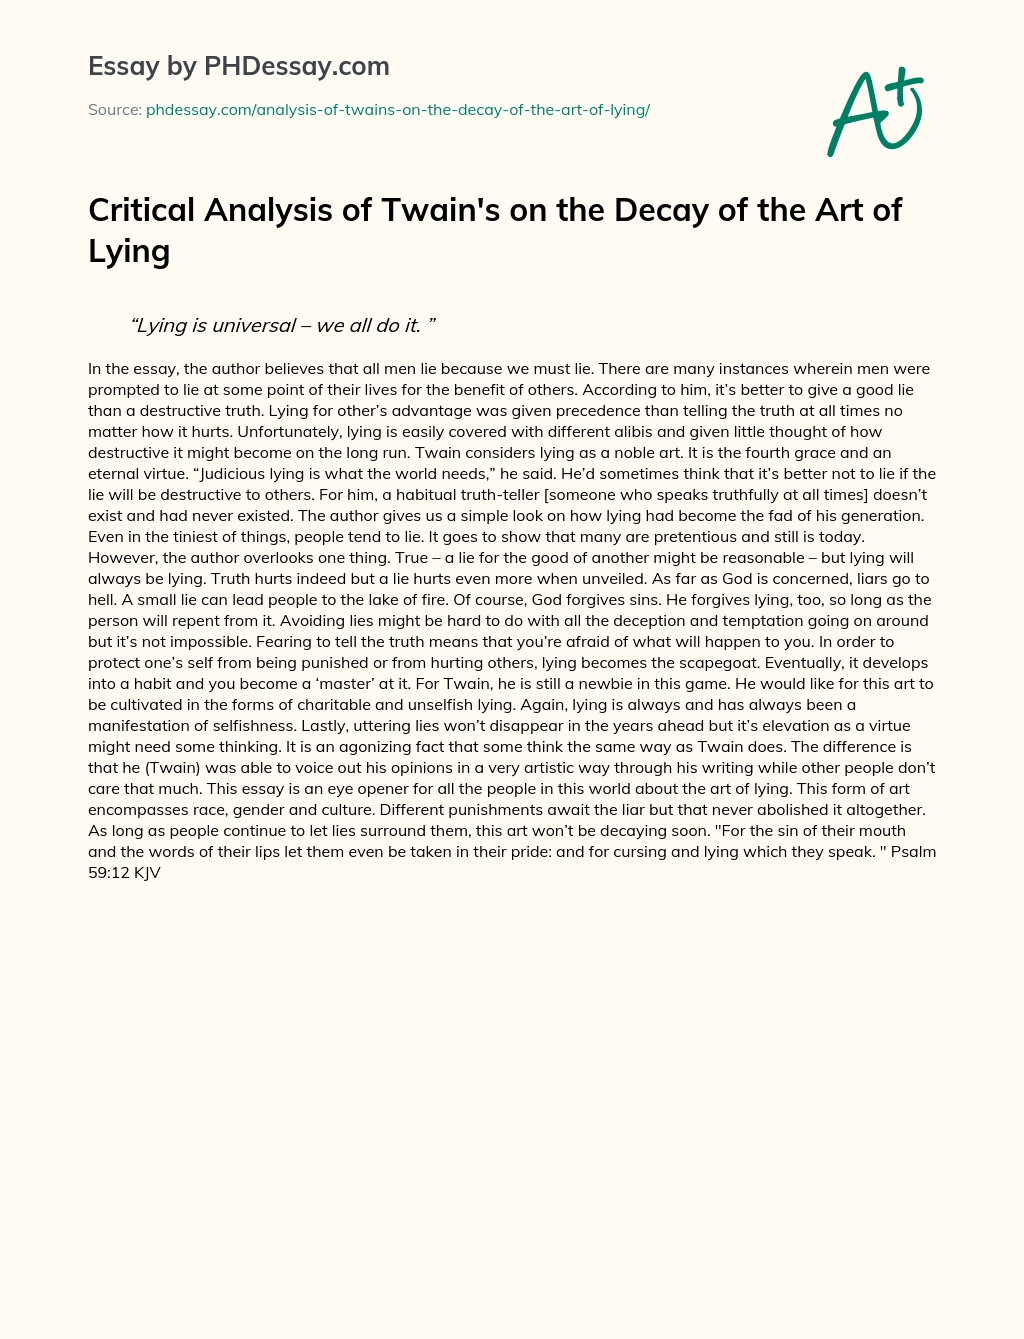 Critical Analysis of Twain’s on the Decay of the Art of Lying essay